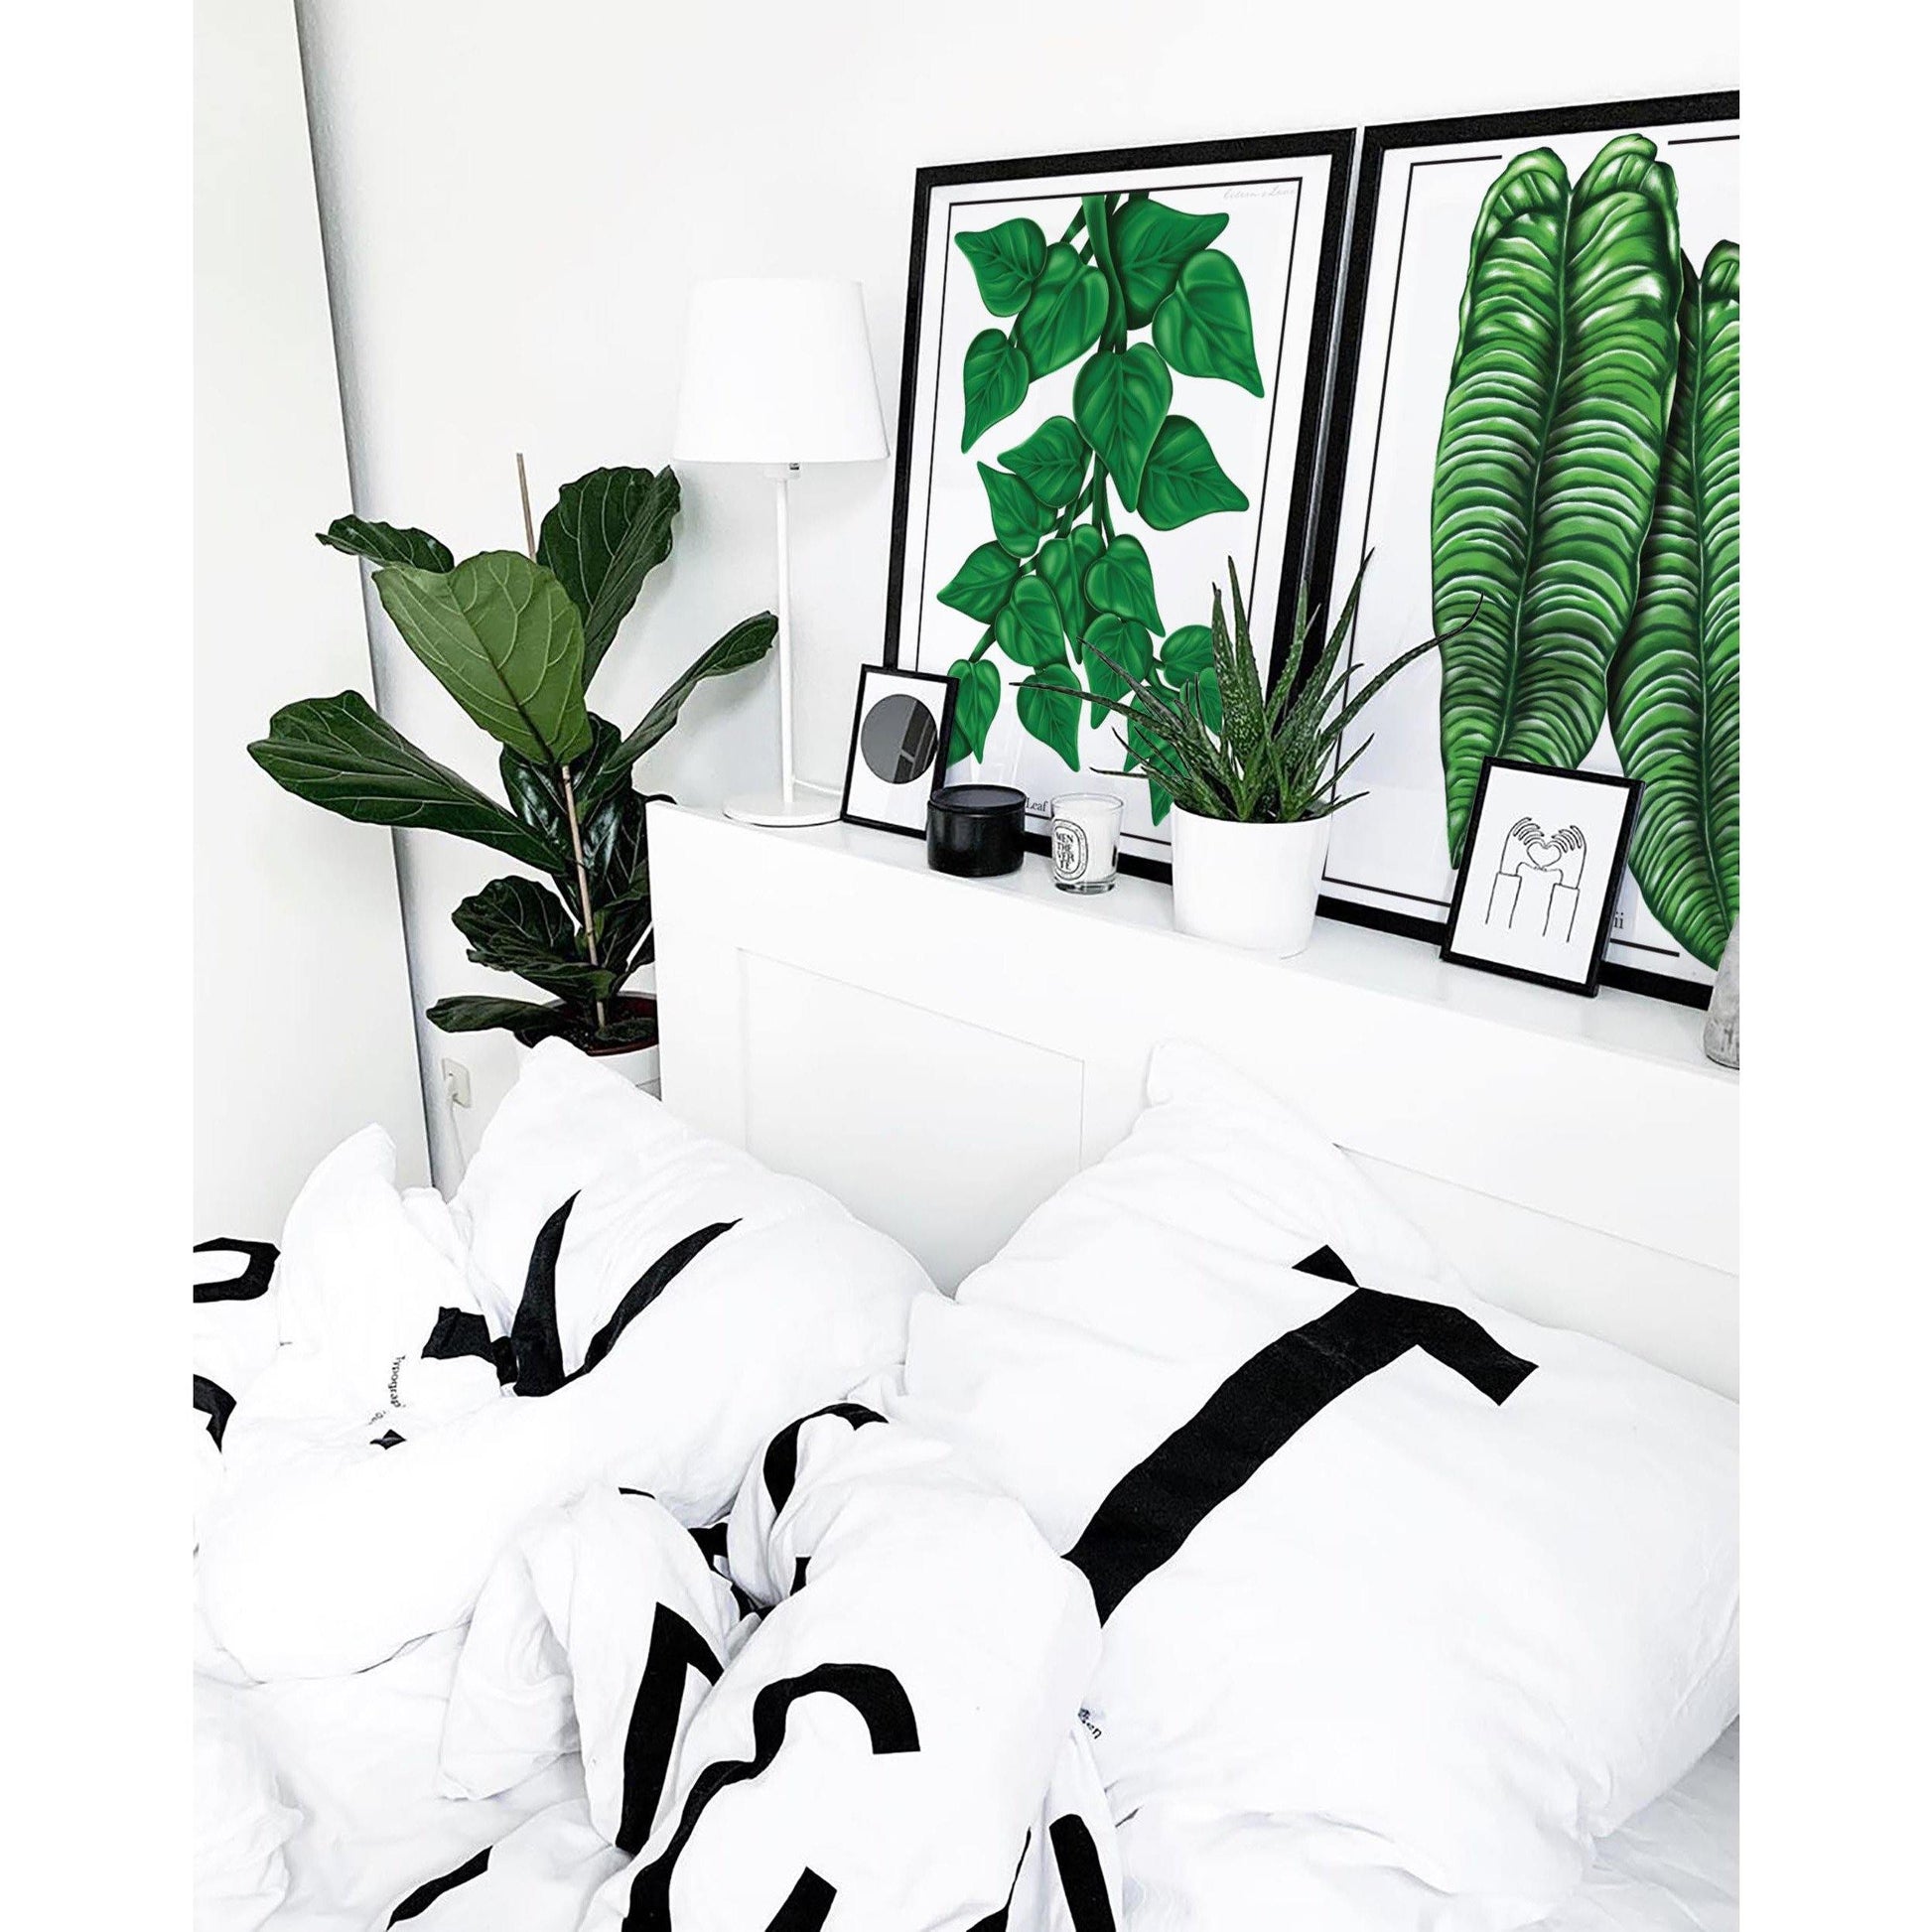 Anthurium Veitchii and heart leaf philodendron artworks hanging together above a bed